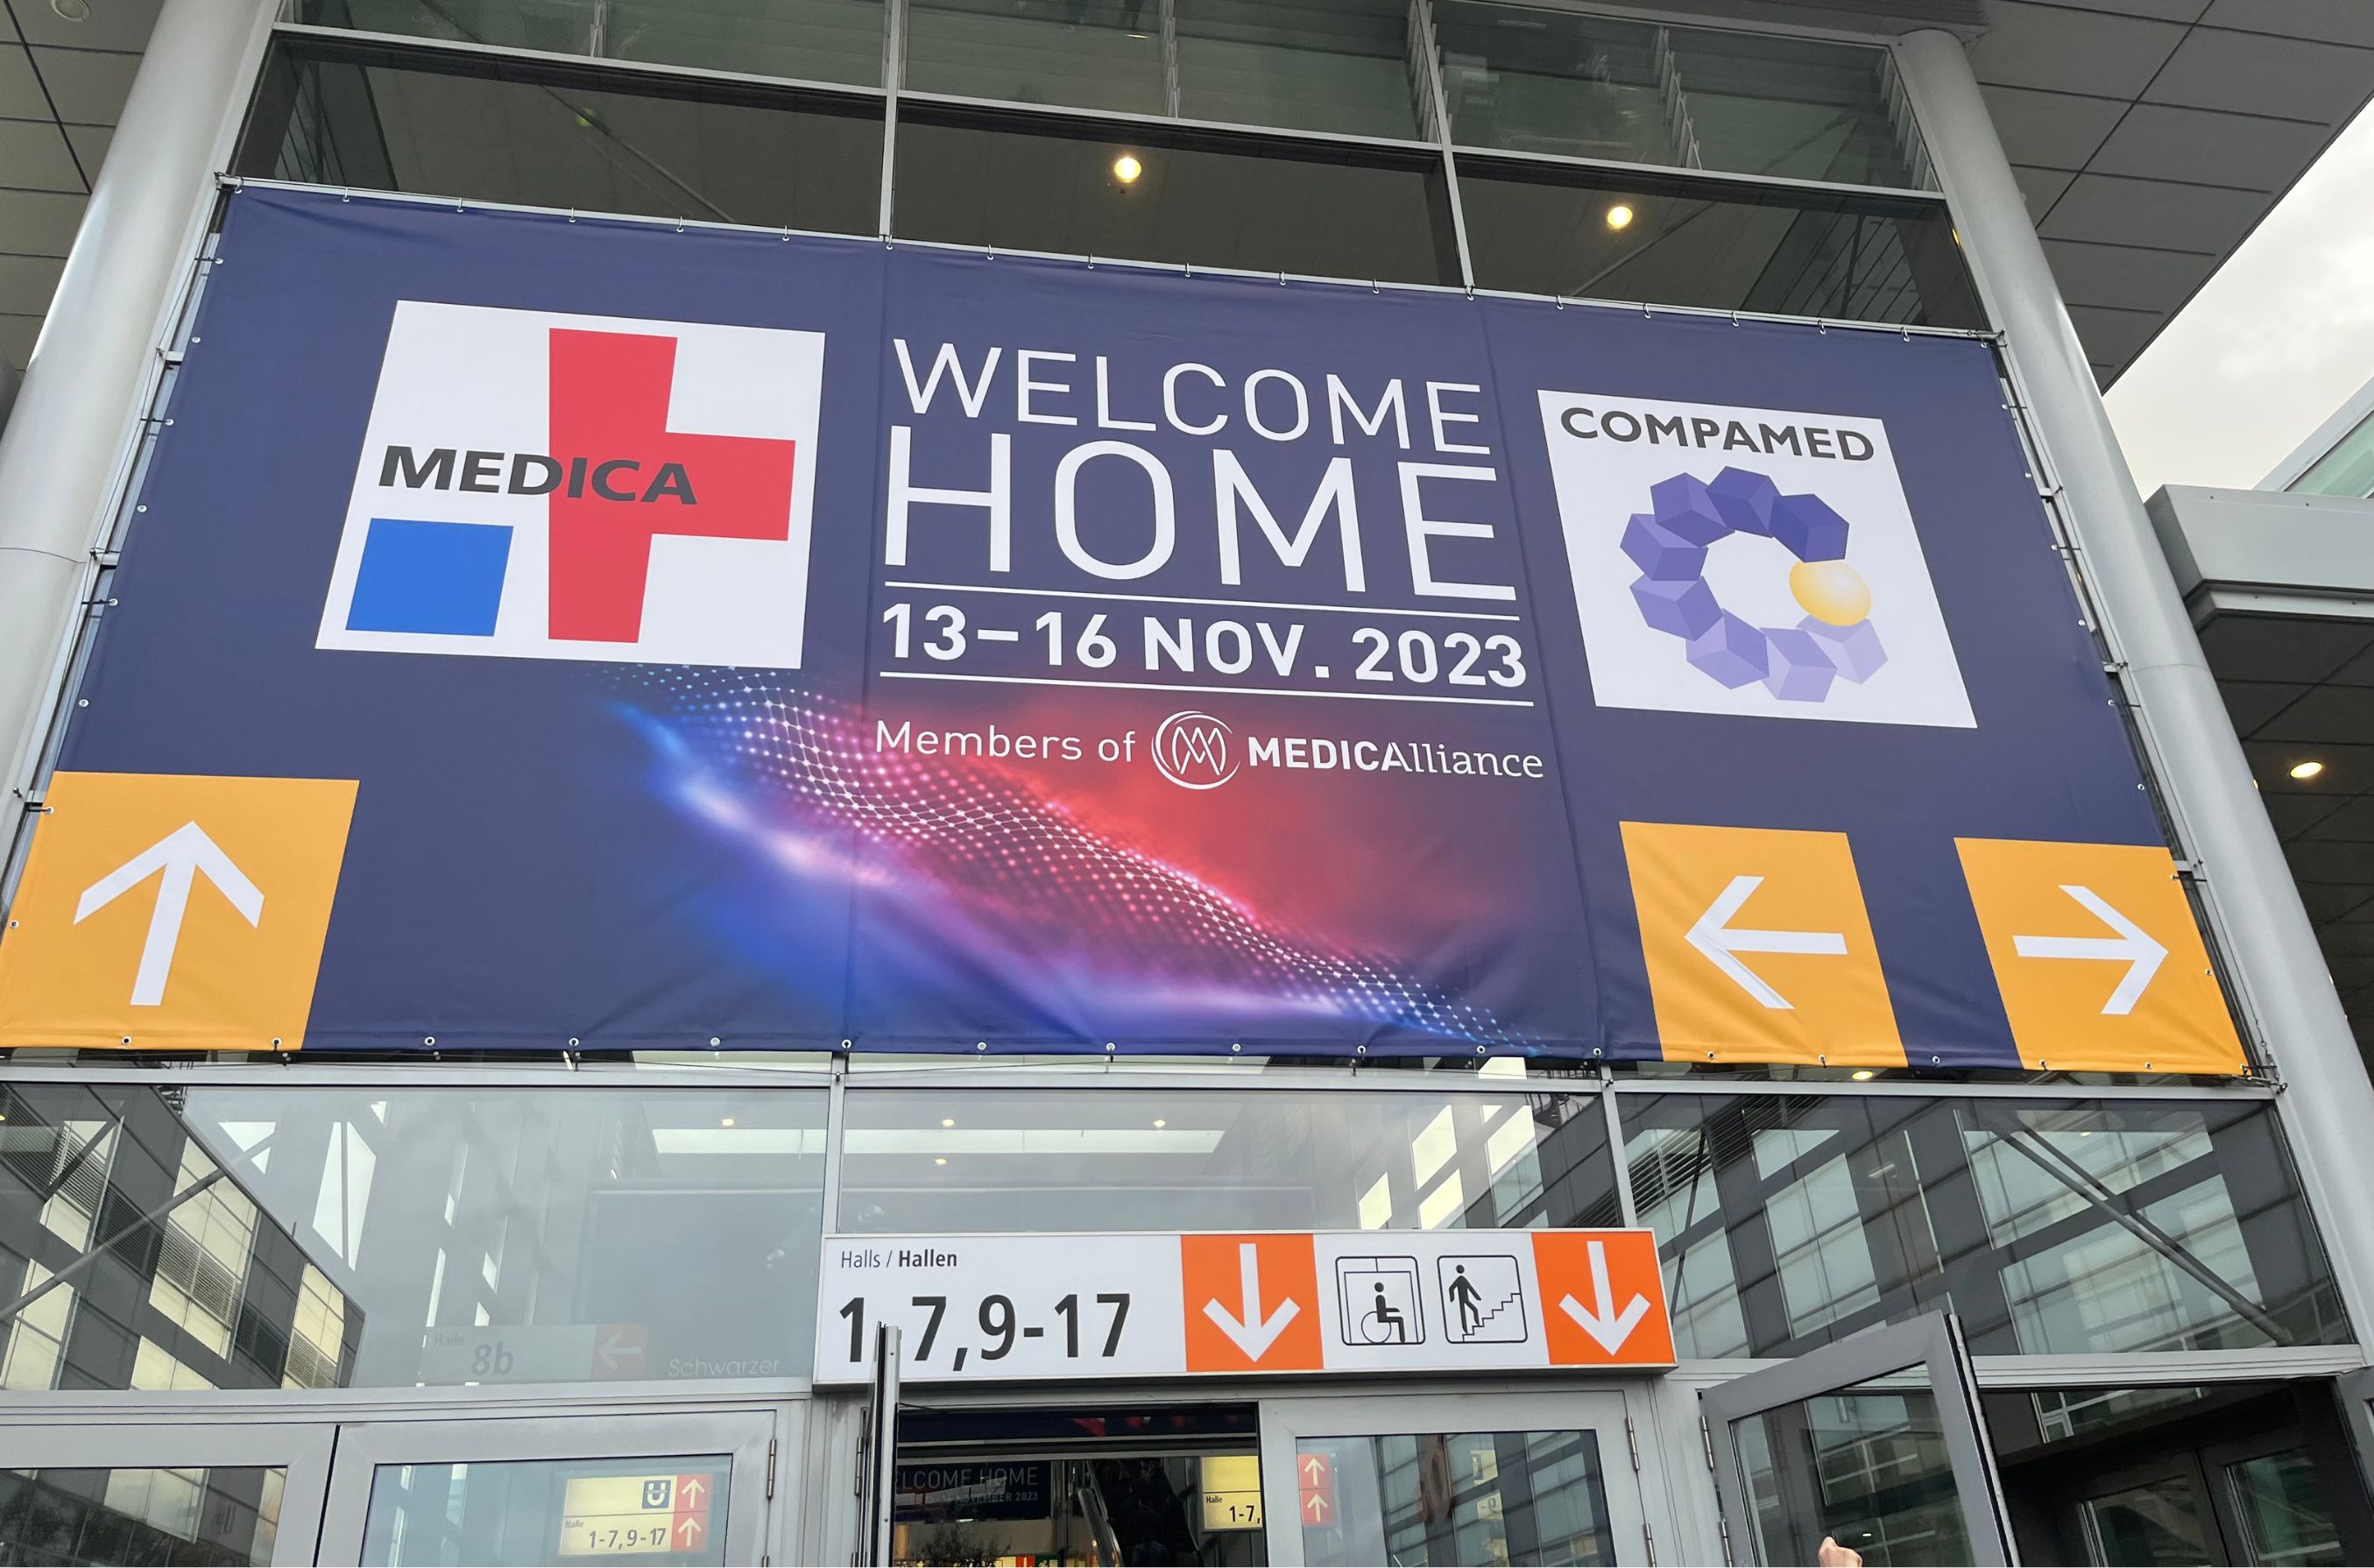 Mantacc Recaps an Energizing First Day at MEDICA 2023